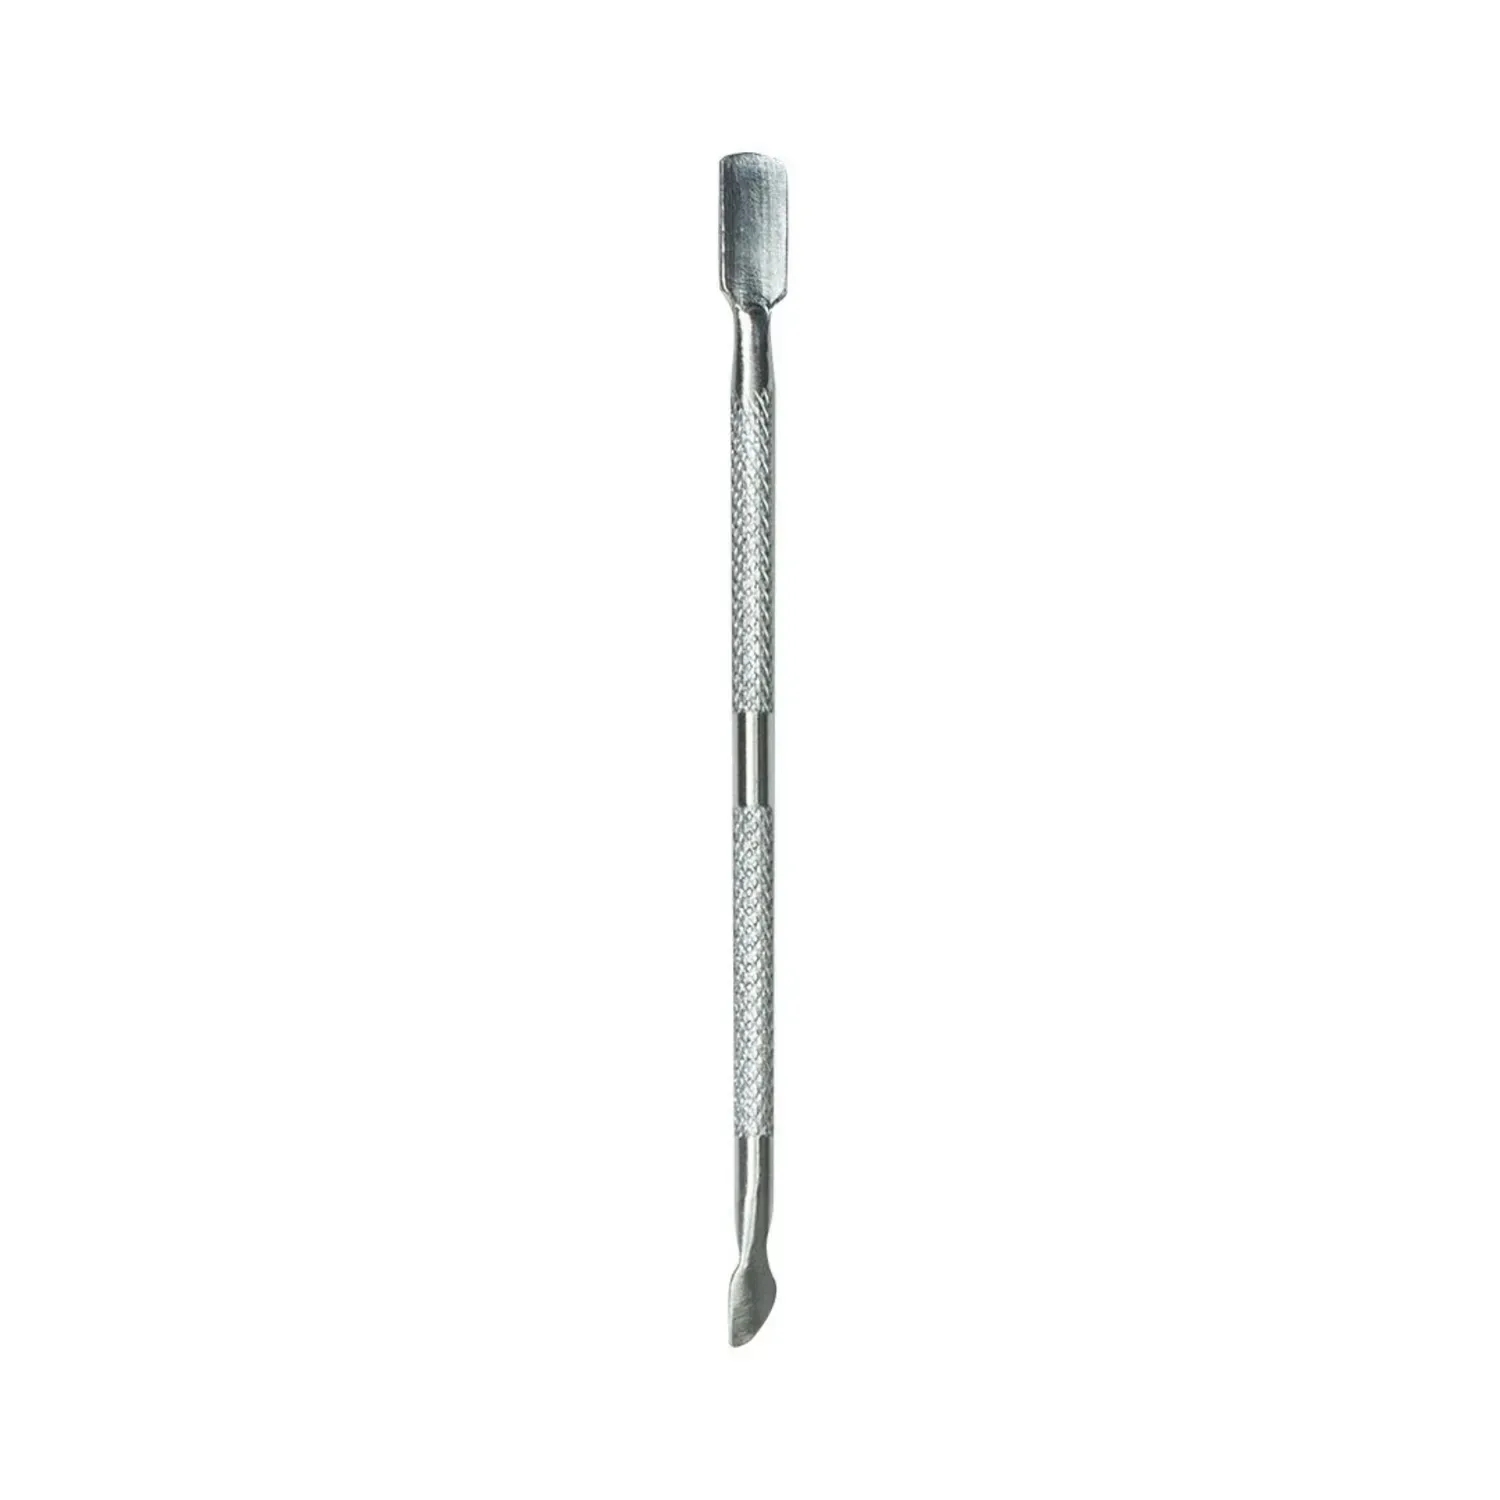 Bronson Professional | Bronson Professional Nail Pusher and Cuticle Remove Manicure Tool (1Pc)